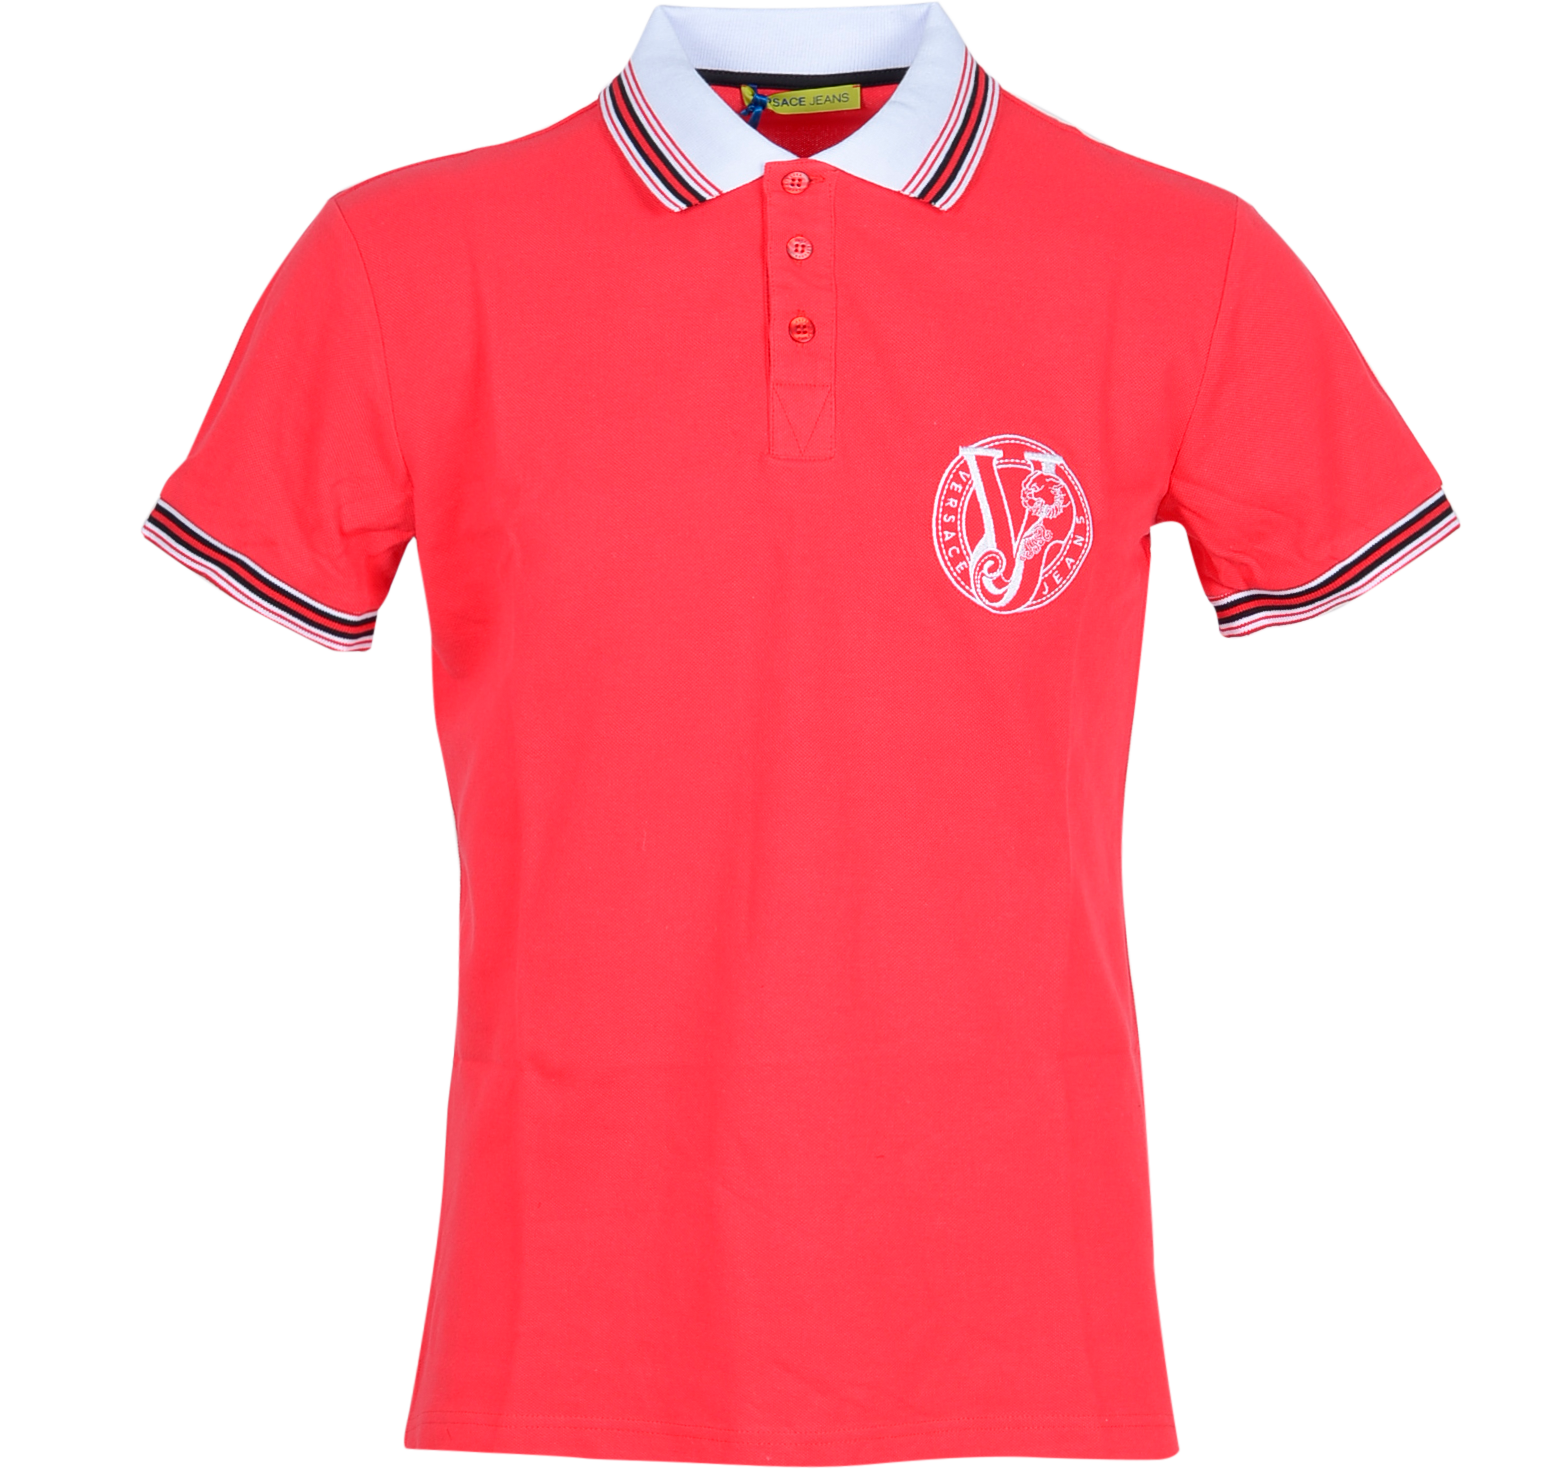 red versace polo shirt